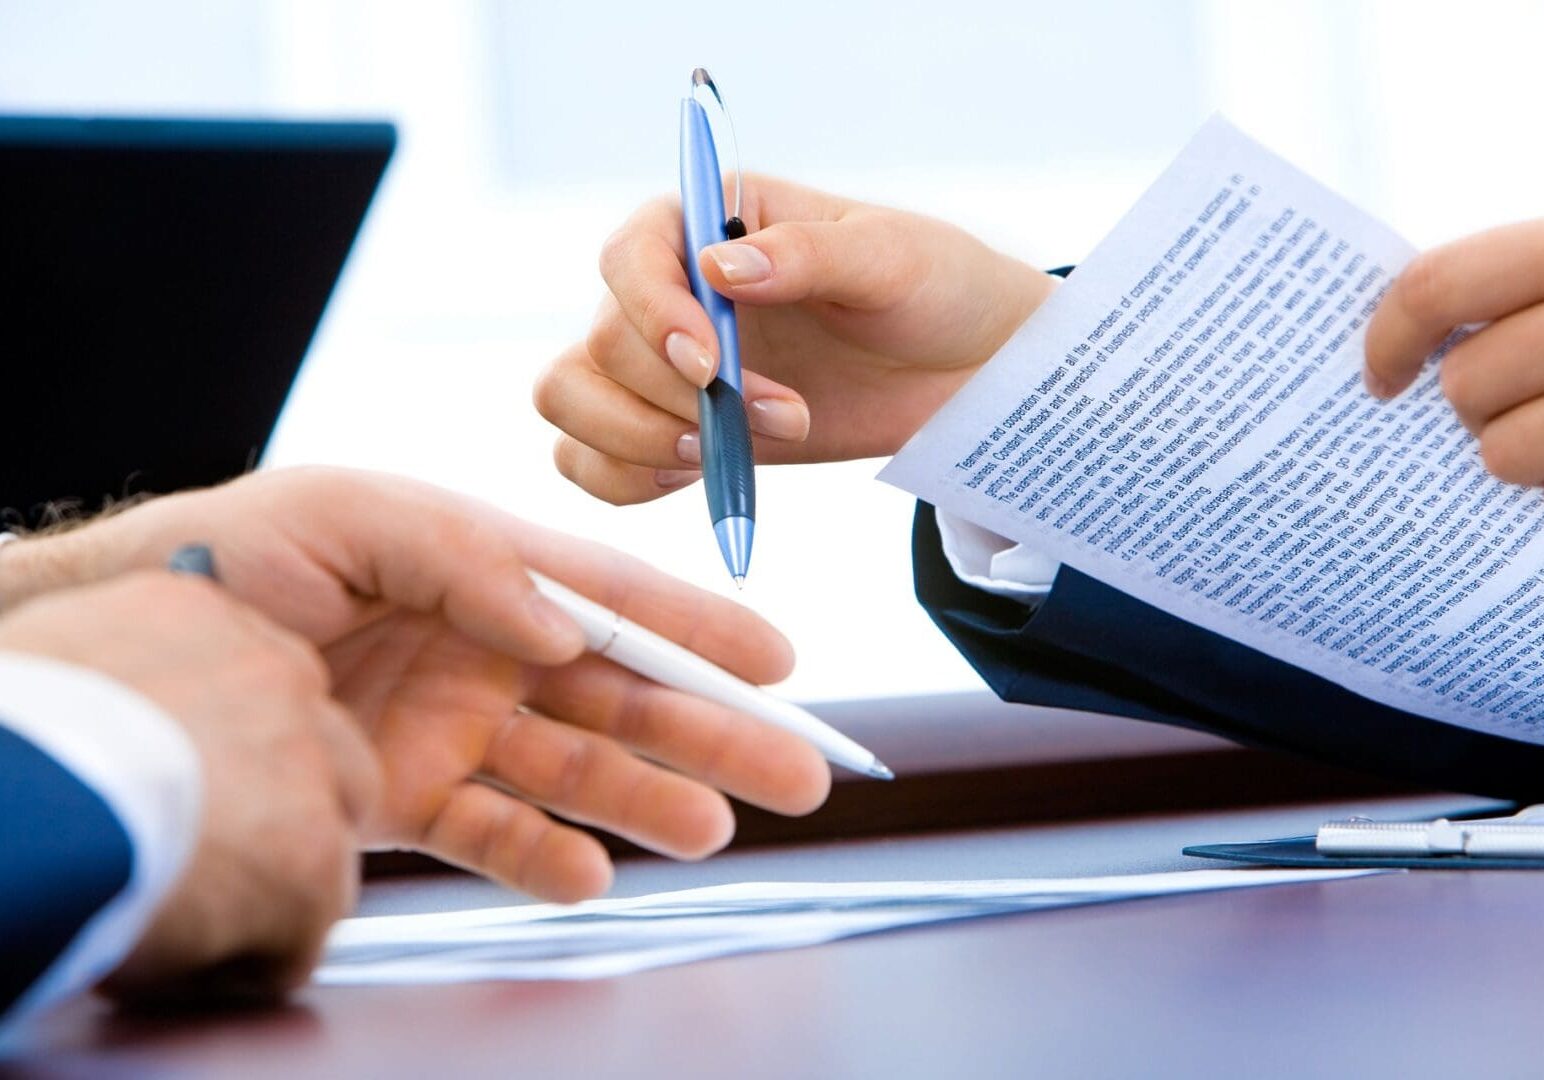 Two business professionals discussing a document at a desk, one handing over a pen for the other to sign.